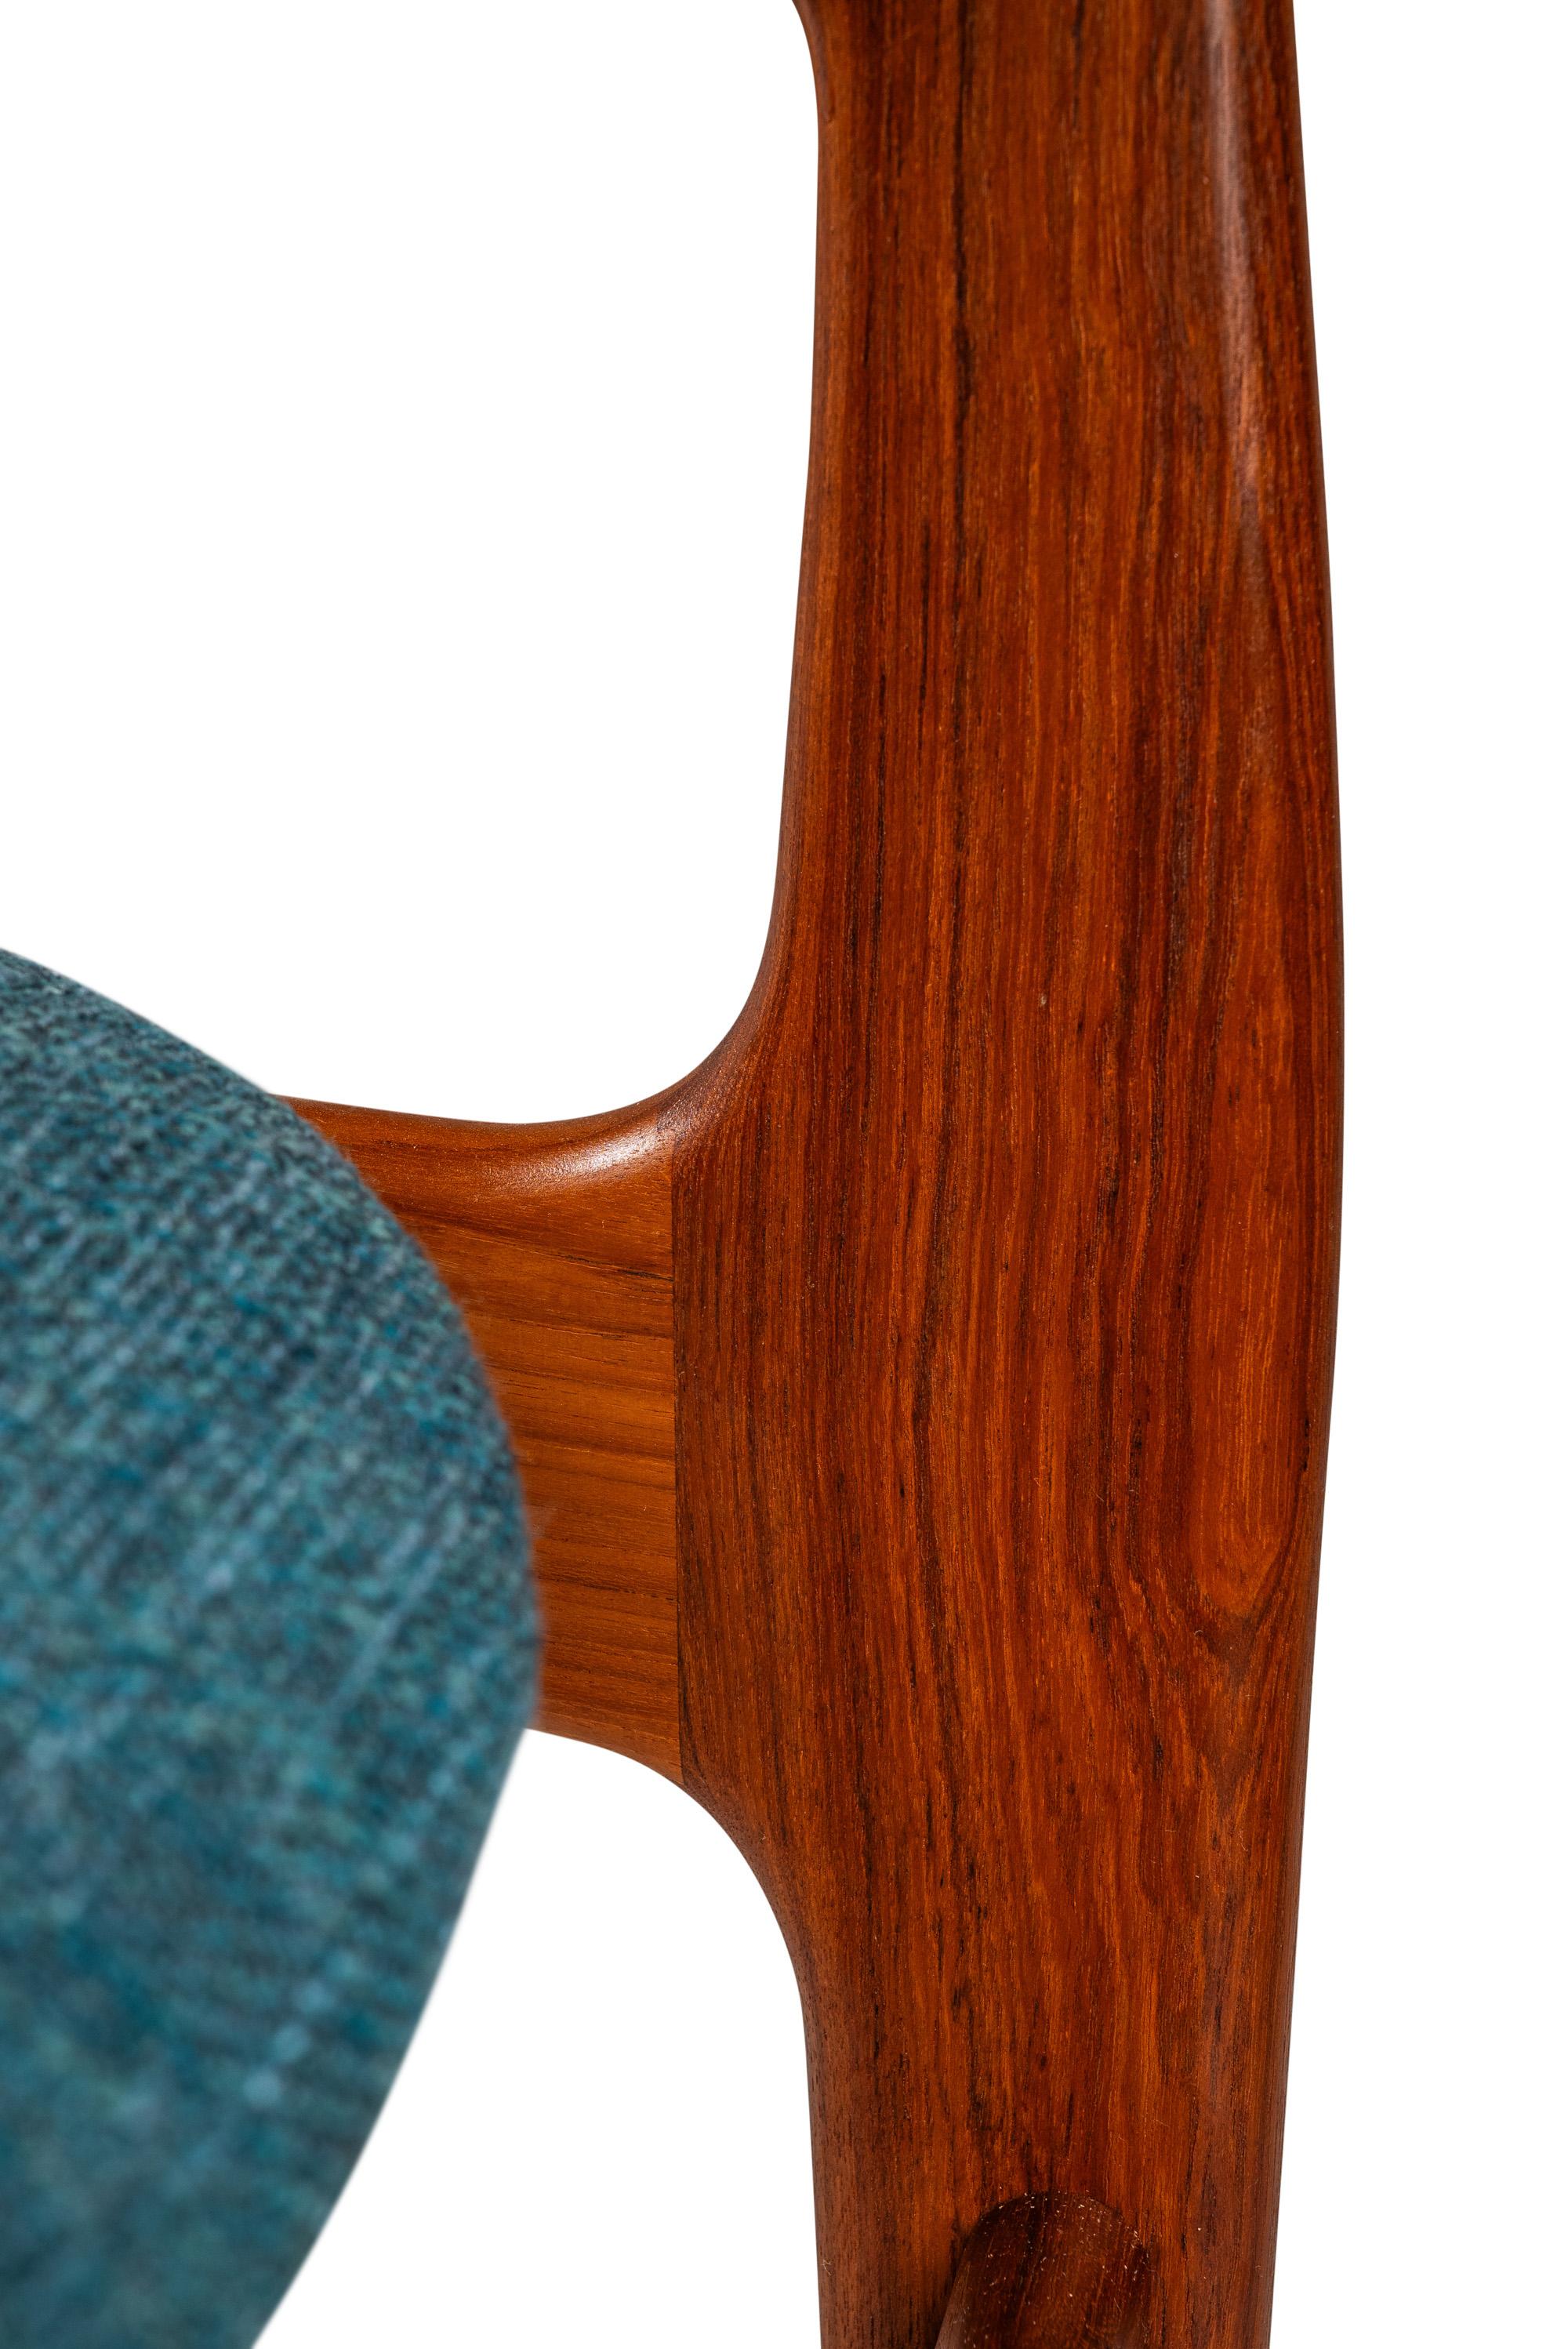 Dining / Desk / Chair in Solid Teak & New Upholstery by Benny Linden, c. 1980s For Sale 2